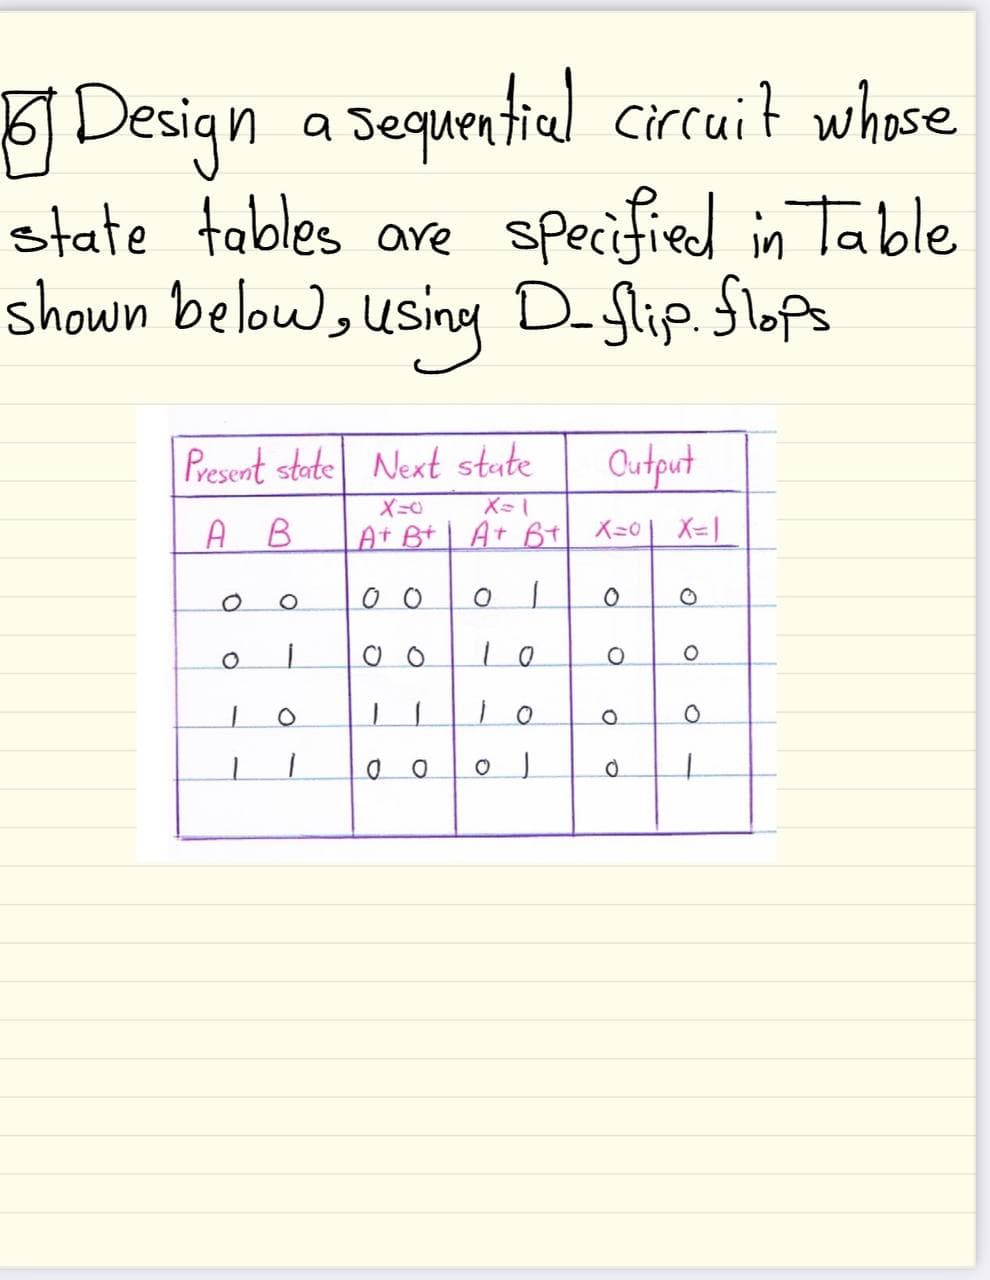 Design a sequential circuit whase
state tables are specified in Table
shown below, D-glip. Slops
using
Present state| Next state
Qutput
A B
At Bt At ß+| X=0
X-1
